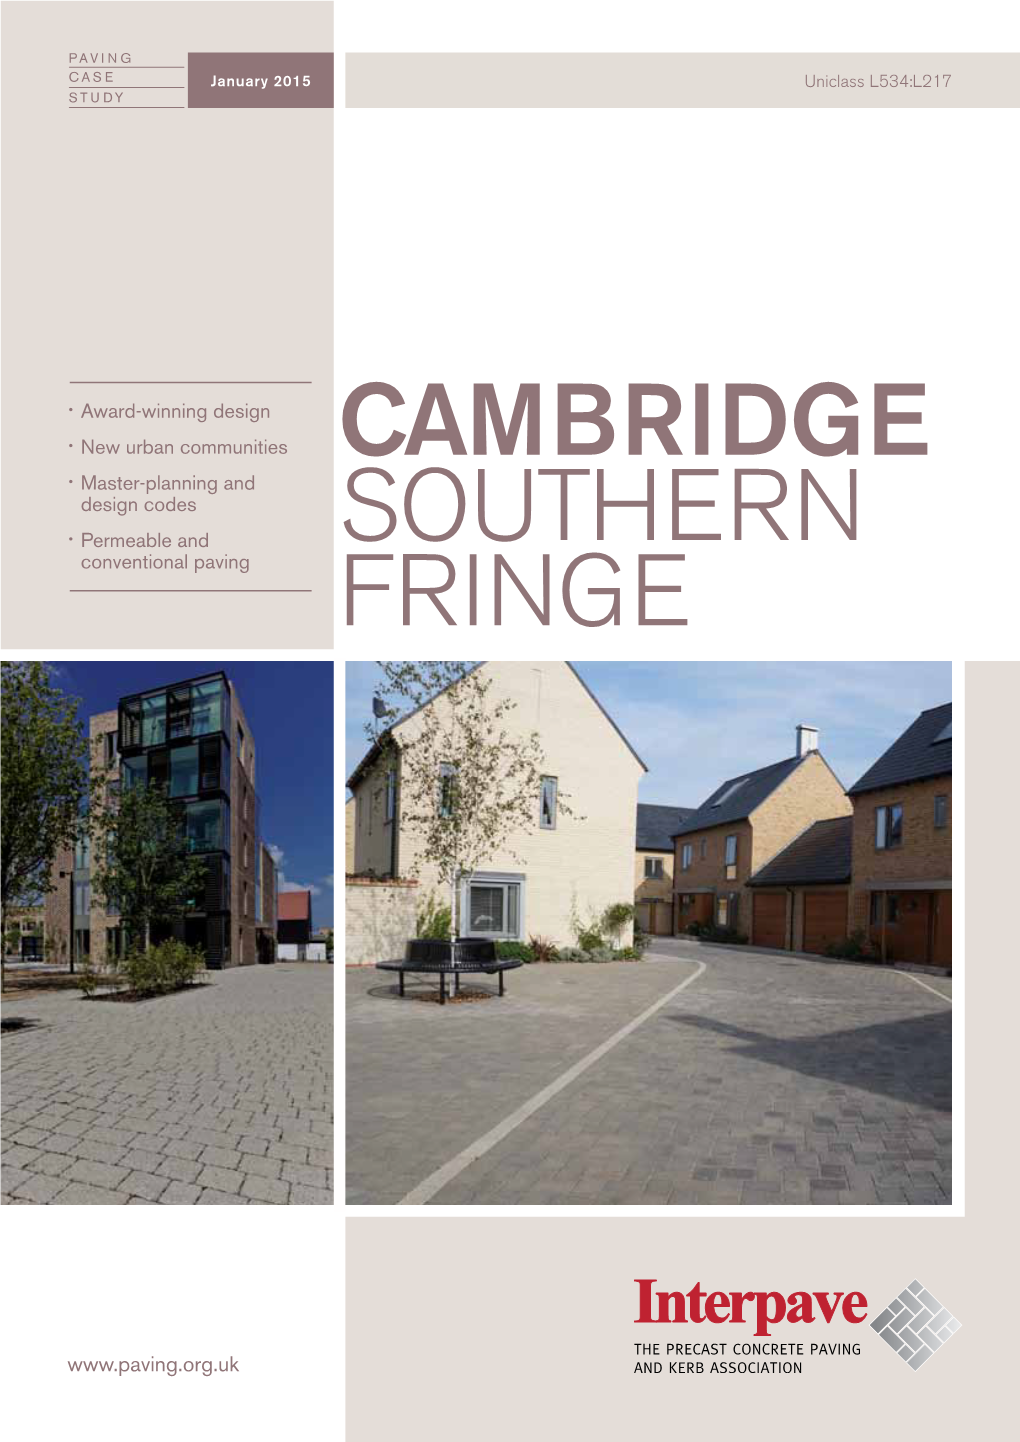 Cambridge Southern Fringe Is a Will Be Relocating